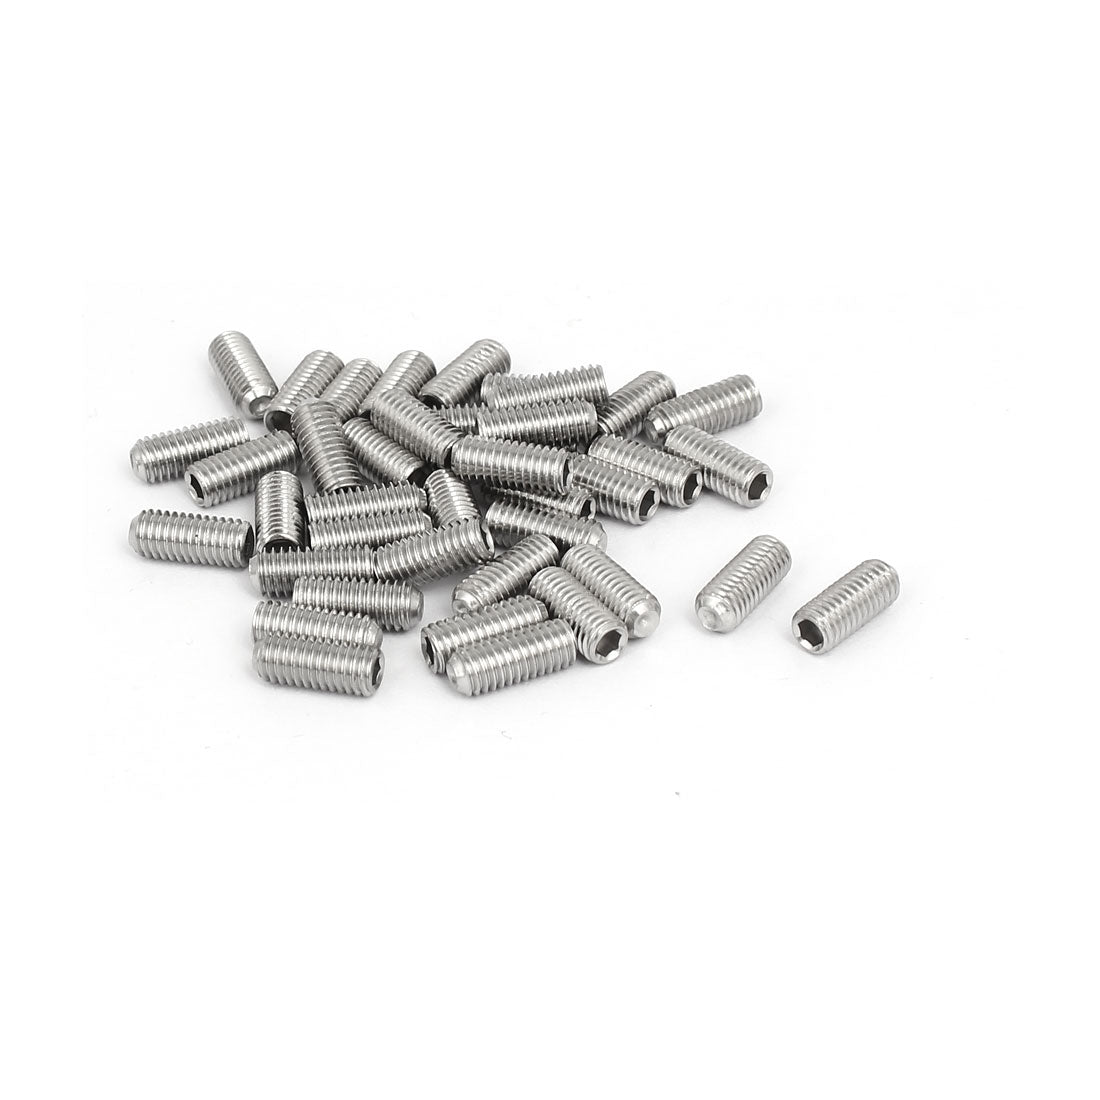 uxcell Uxcell M5x12mm 316 Stainless Steel Hex Socket Cup Point Grub Set Screws 40pcs